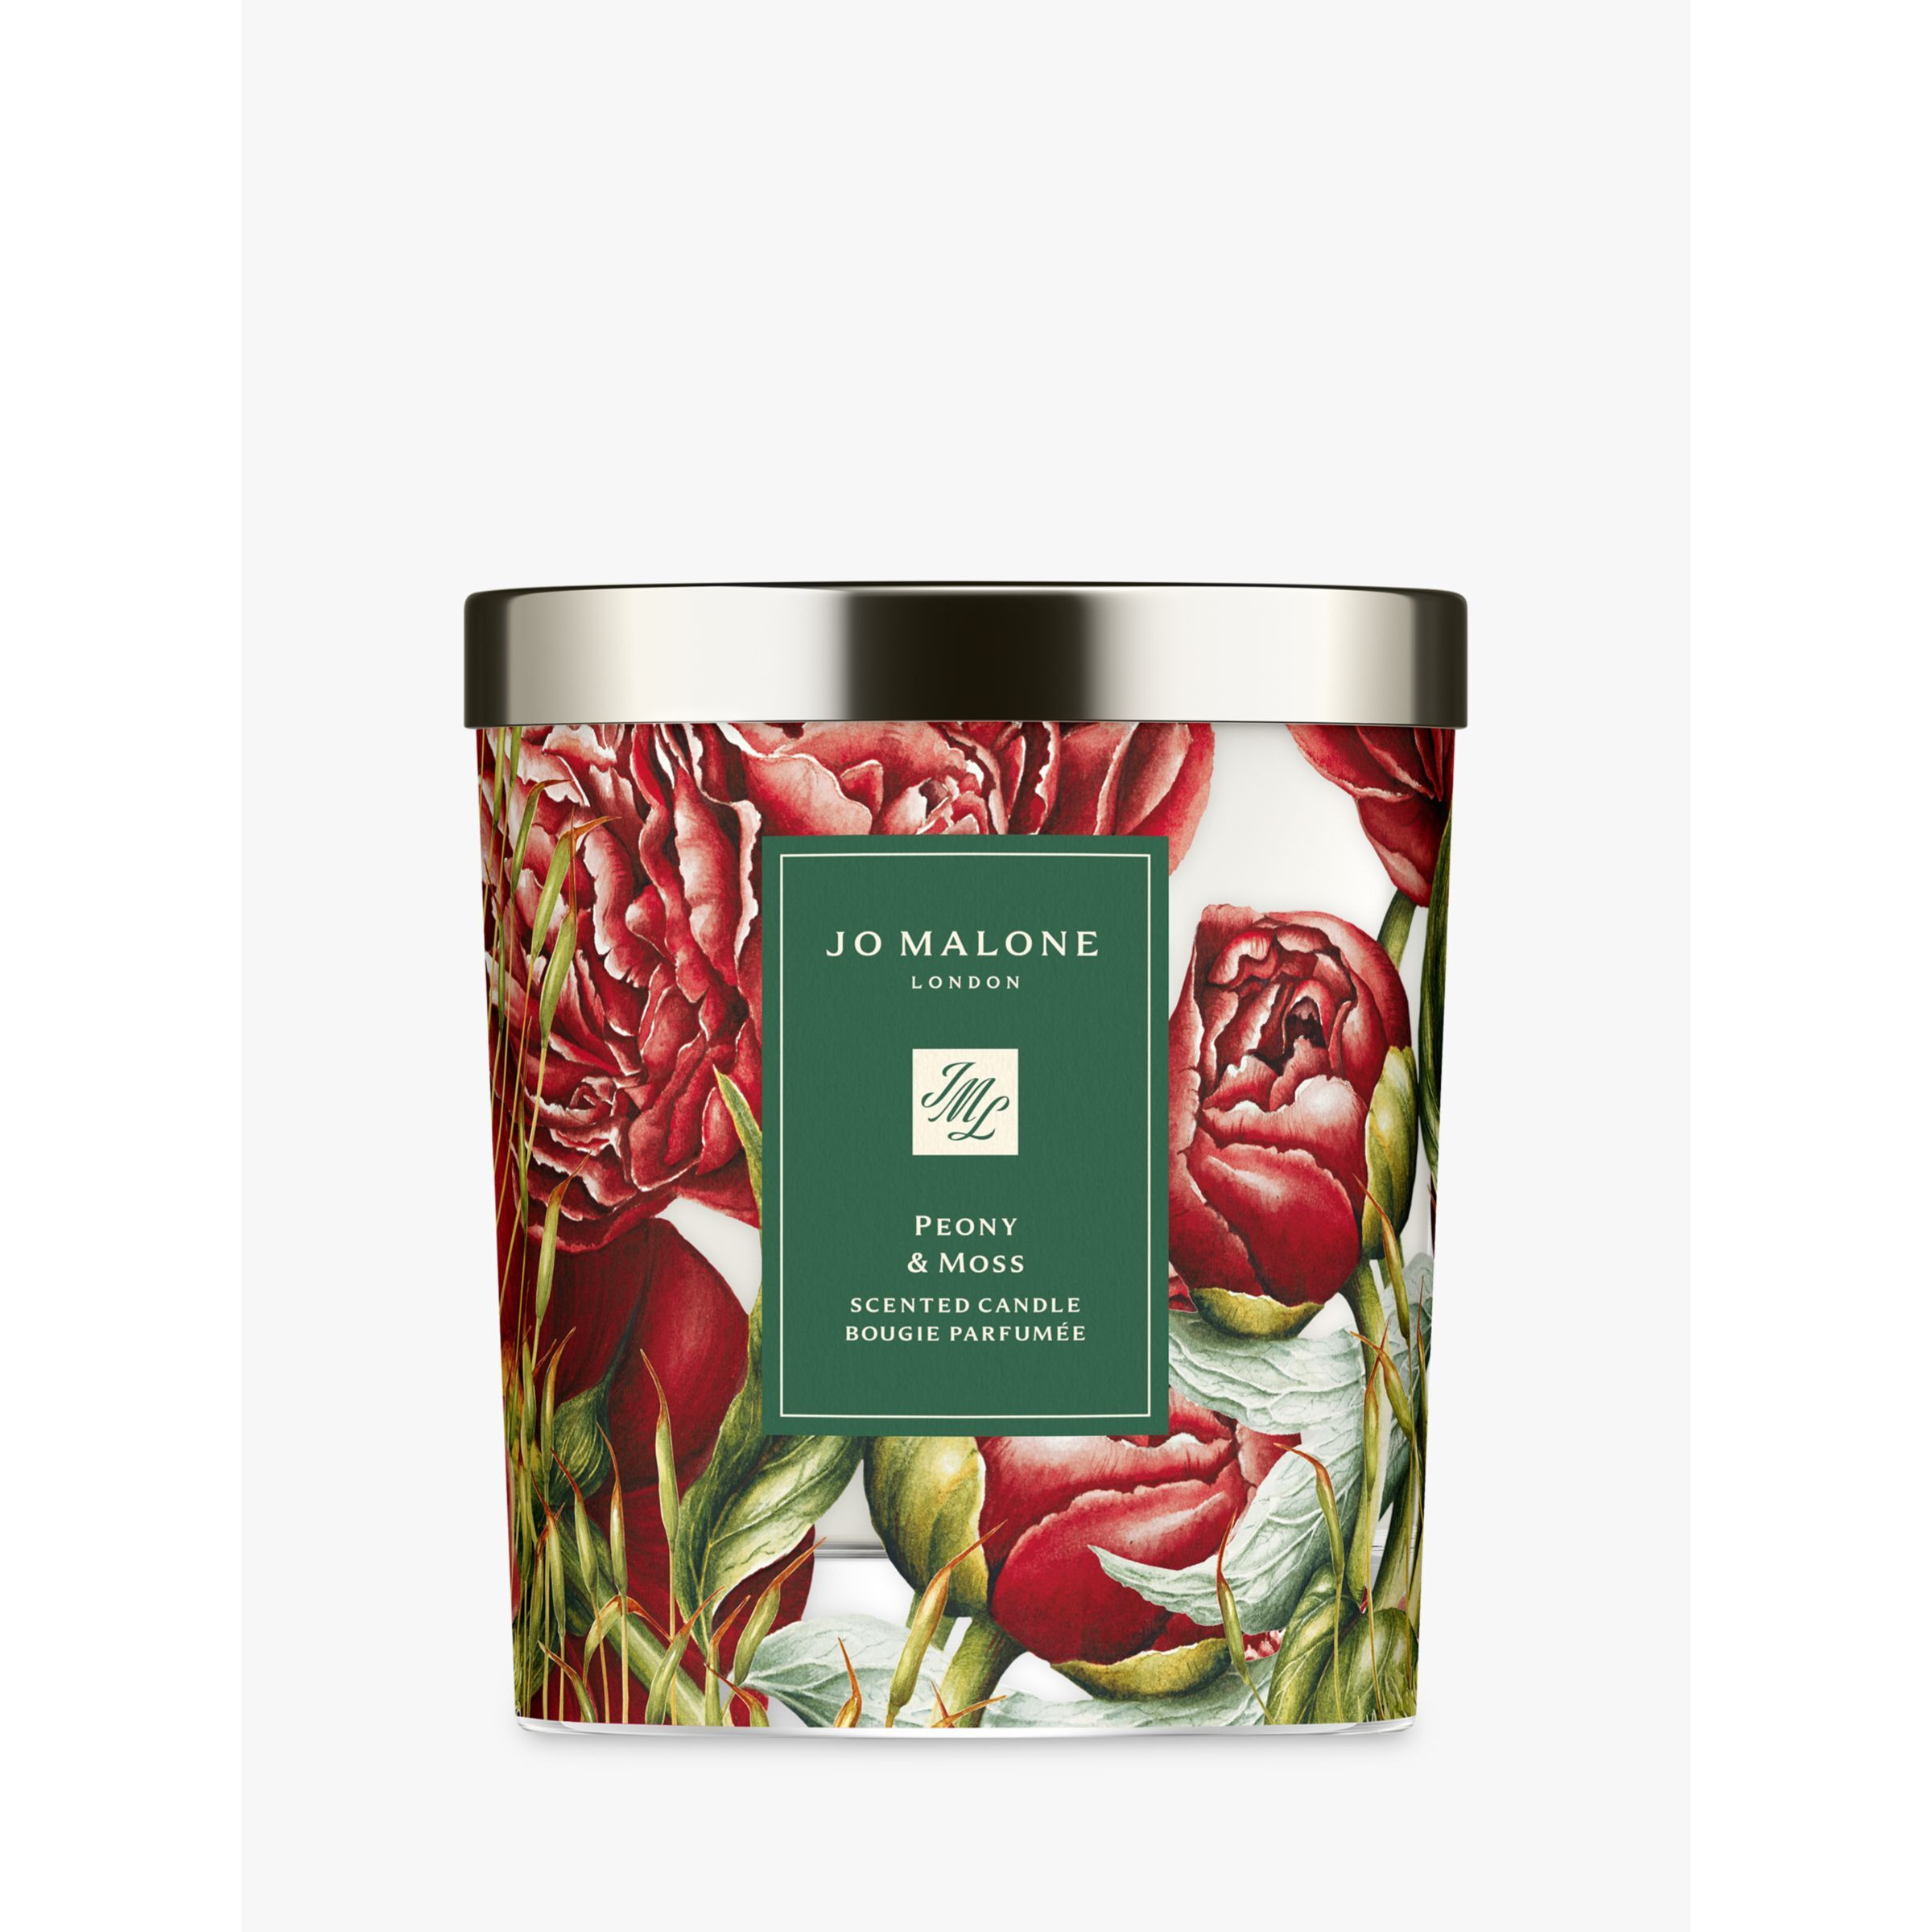 Jo Malone London Peony & Moss Charity Home Scented Candle, 200g - image 1